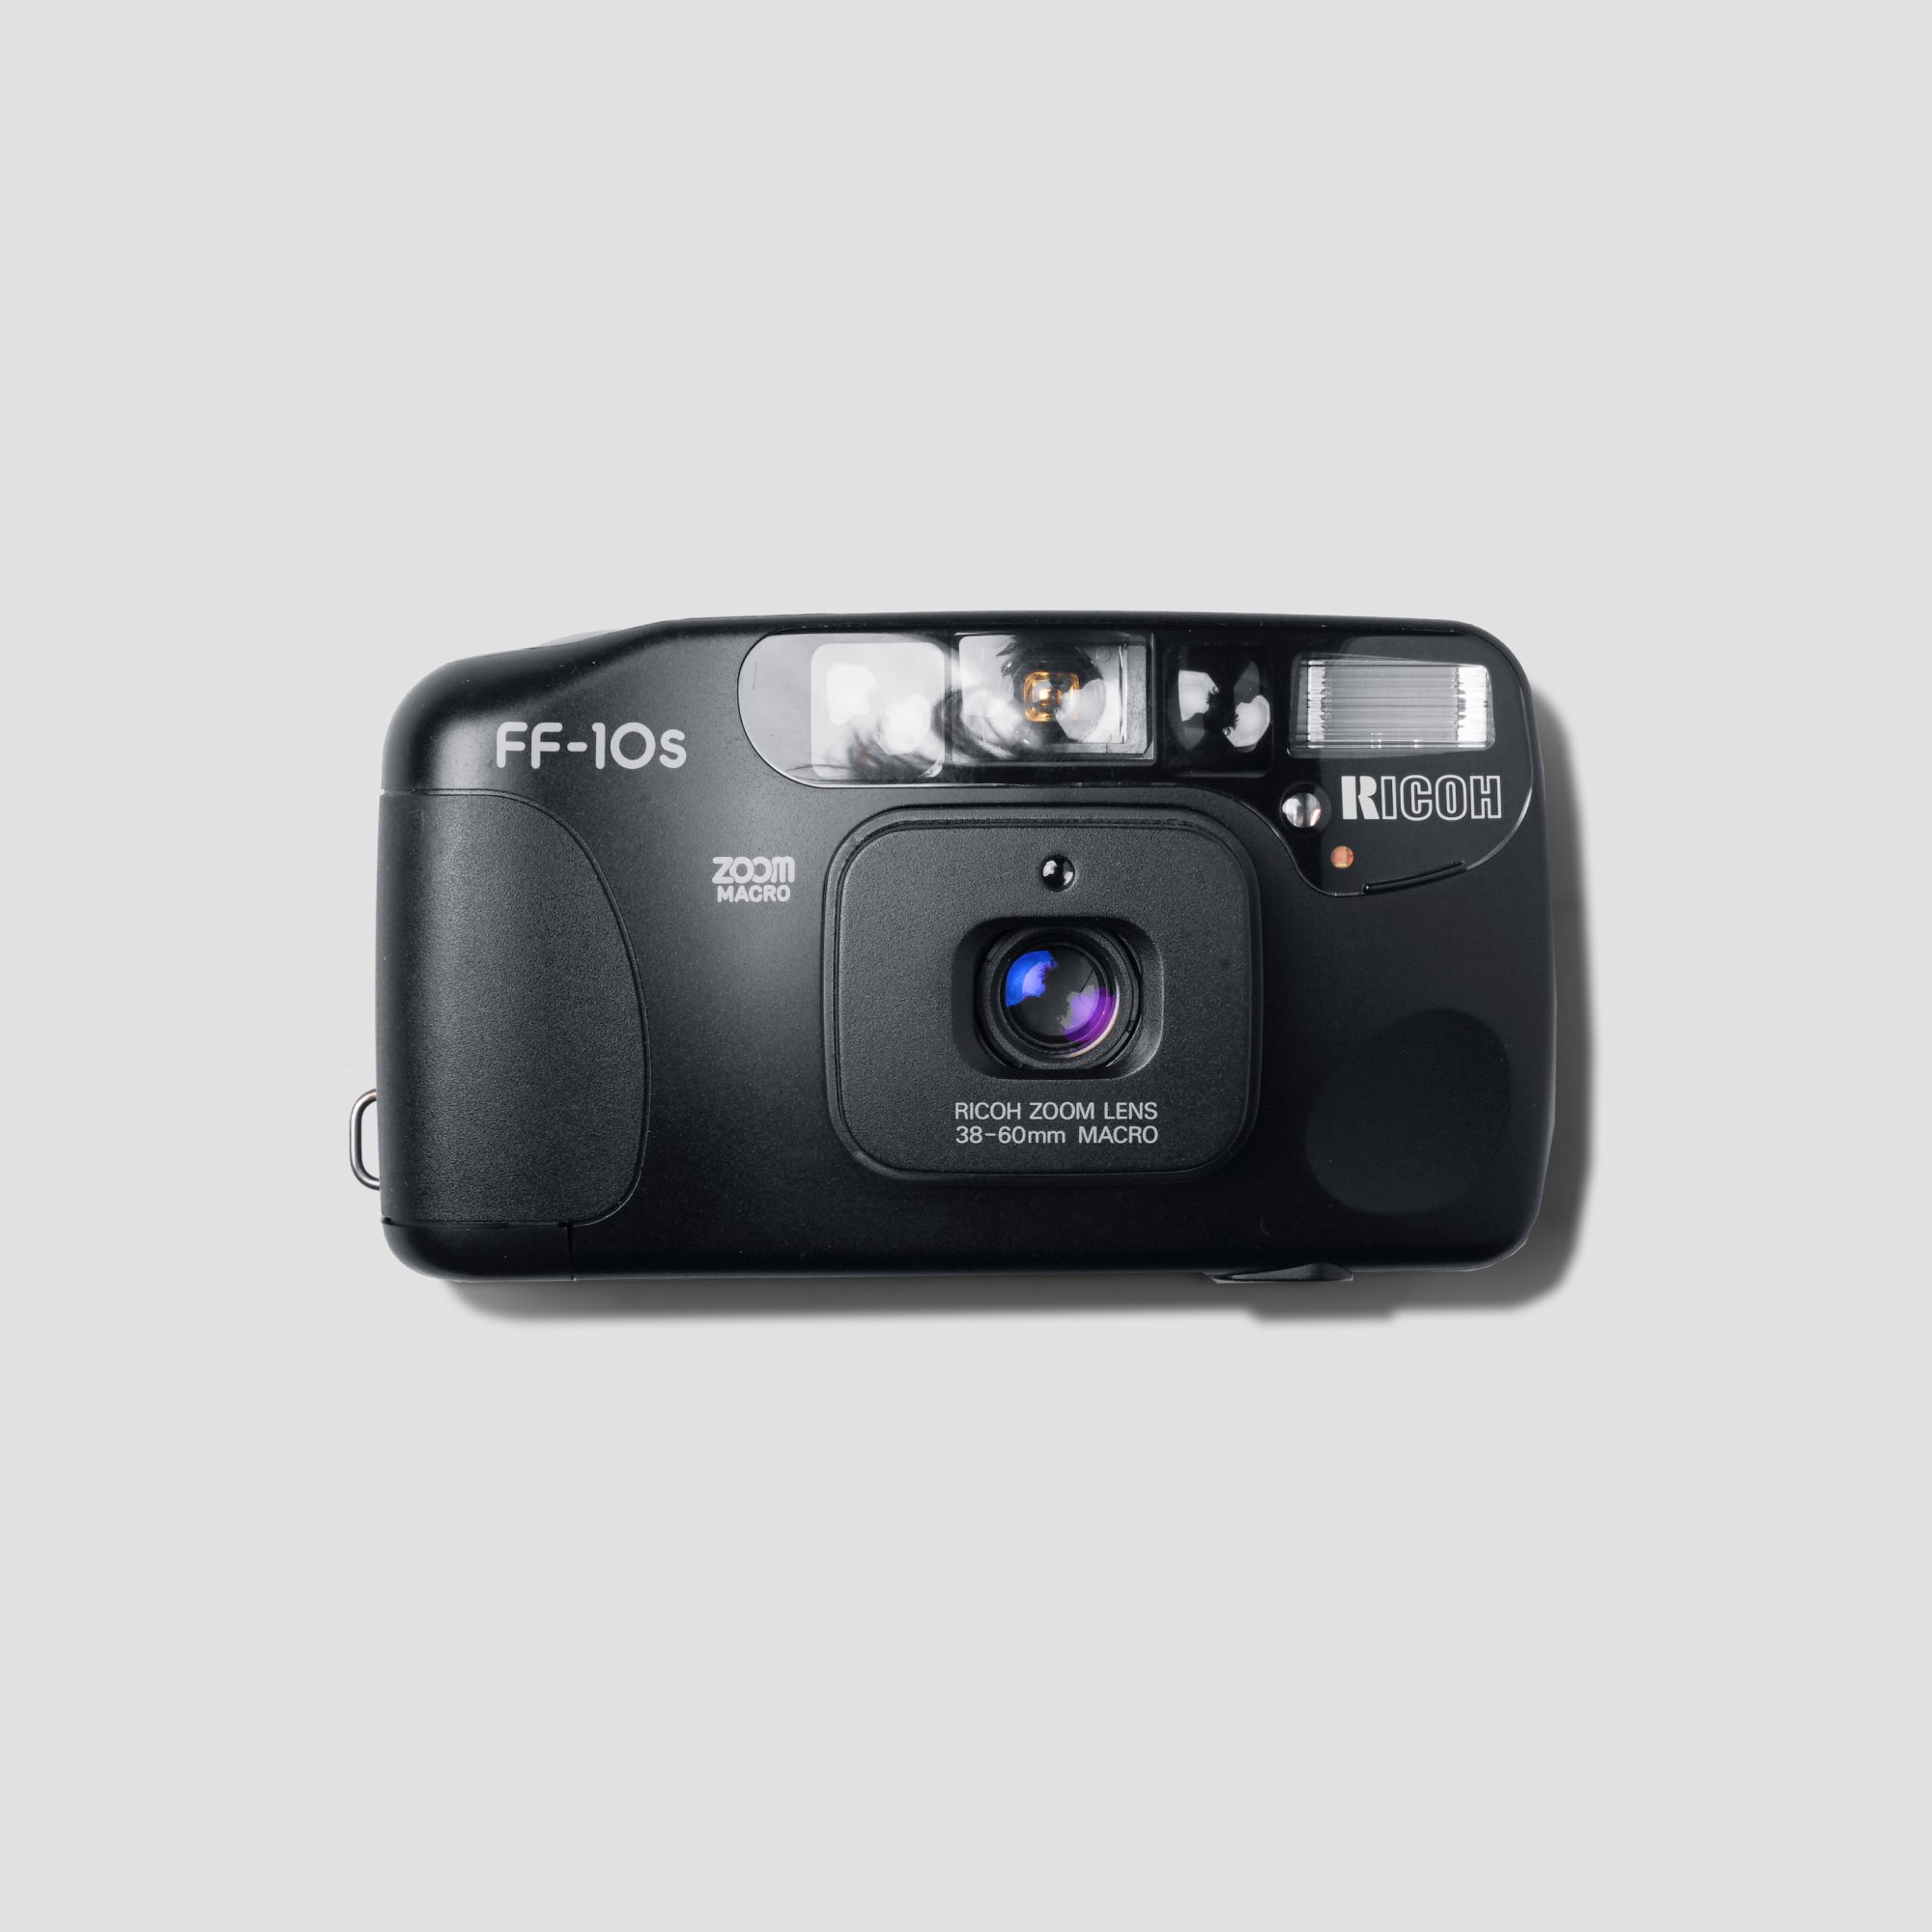 Buy Ricoh FF-10s Zoom now at Analogue Amsterdam